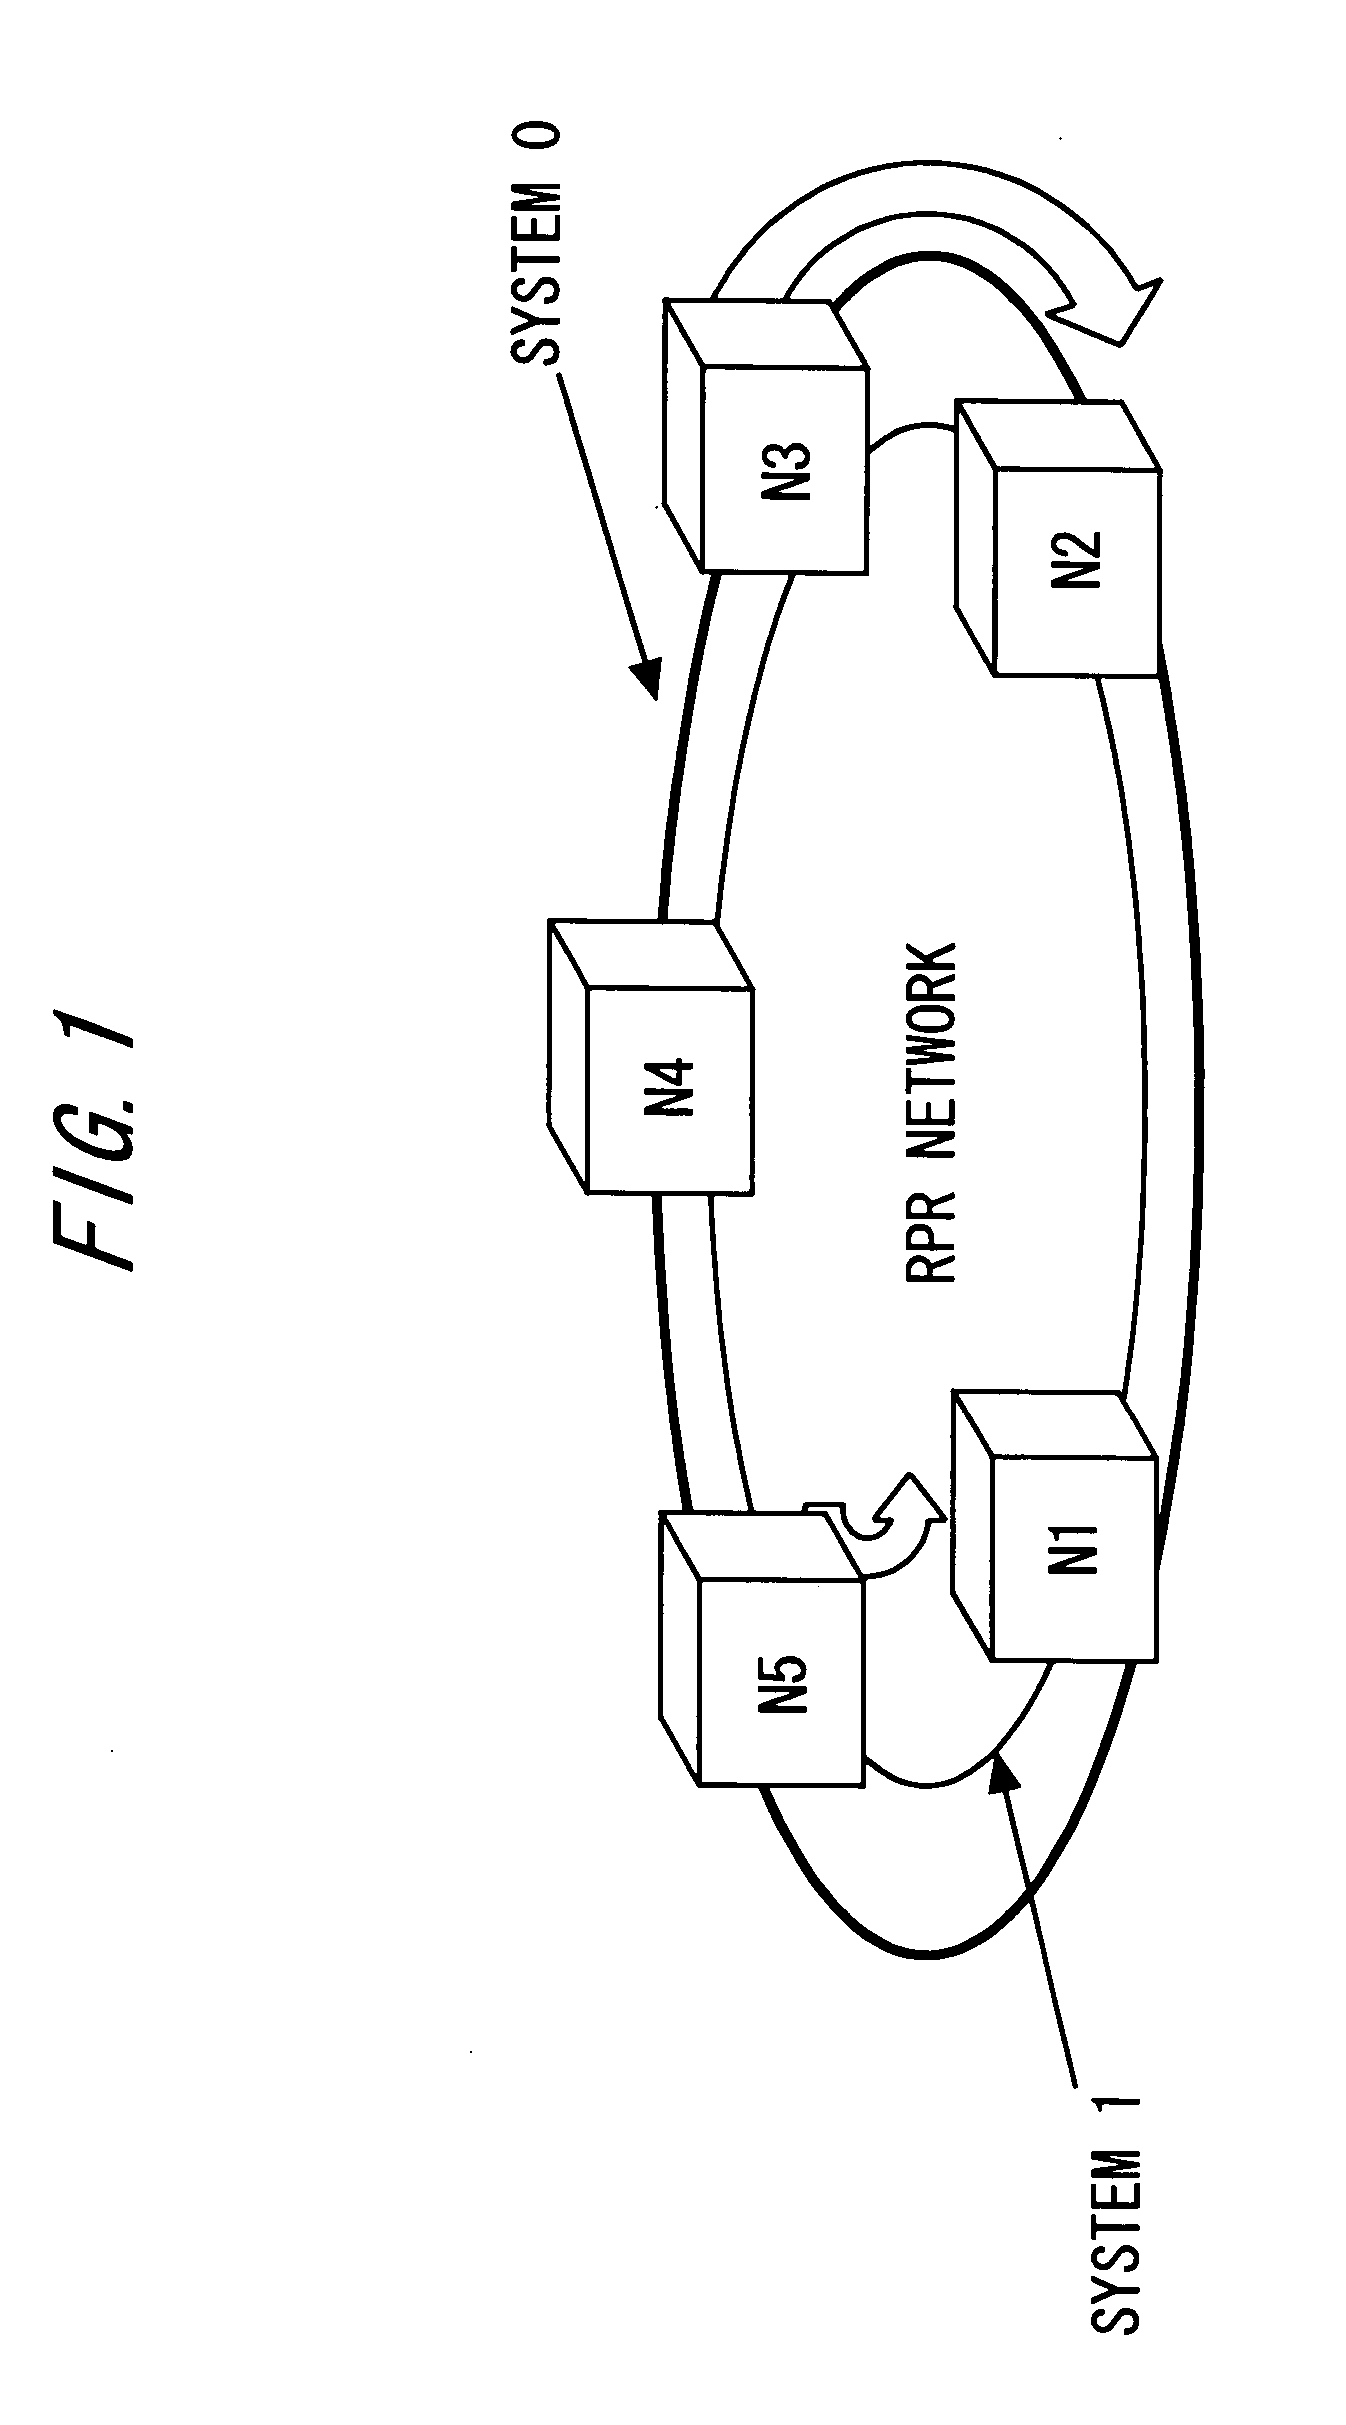 Method for making effective use of bandwidth in multicast communication on ring network